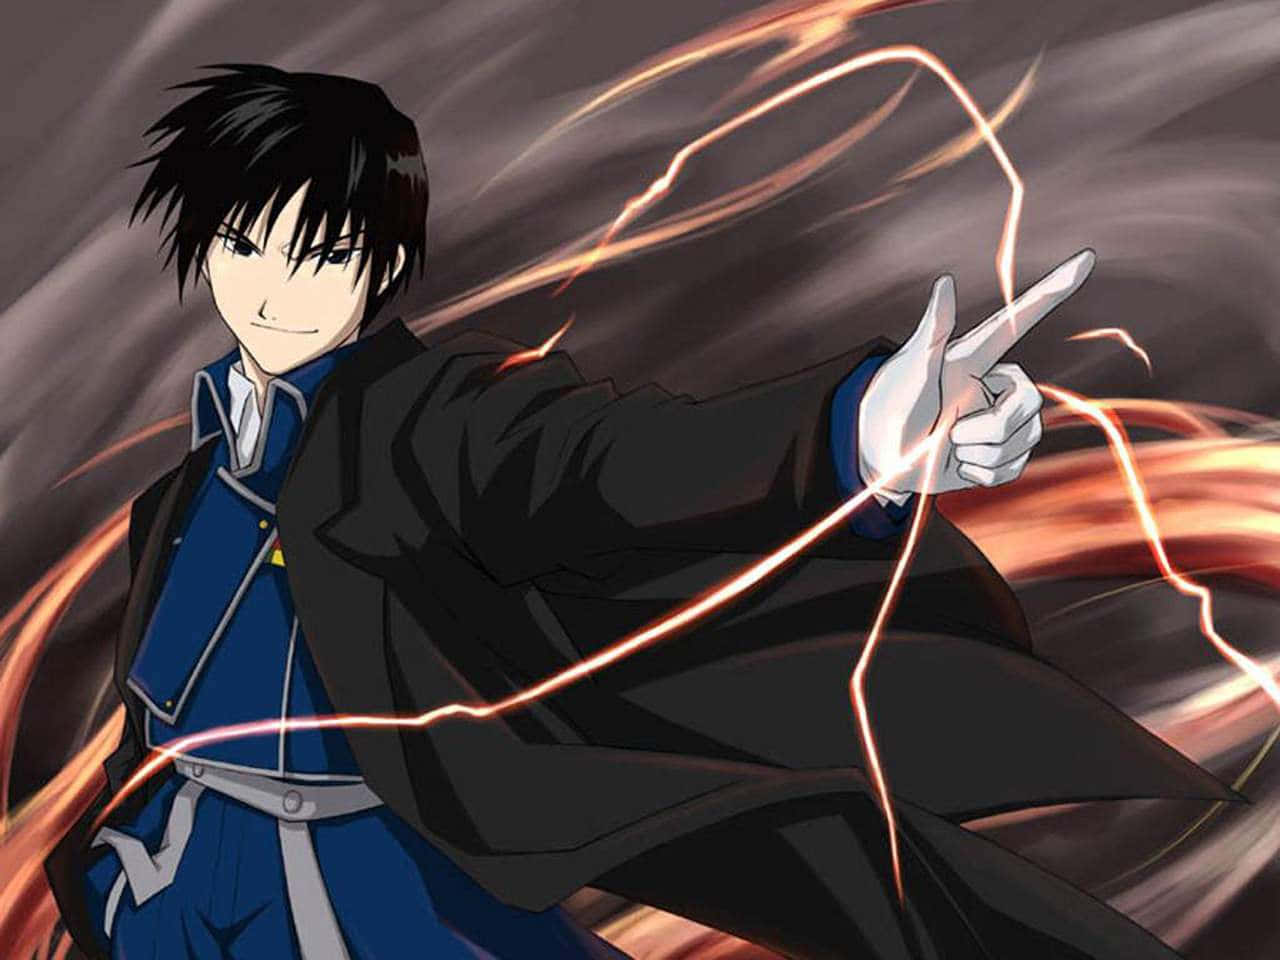 Intense Roy Mustang in action with flames and dramatic background Wallpaper